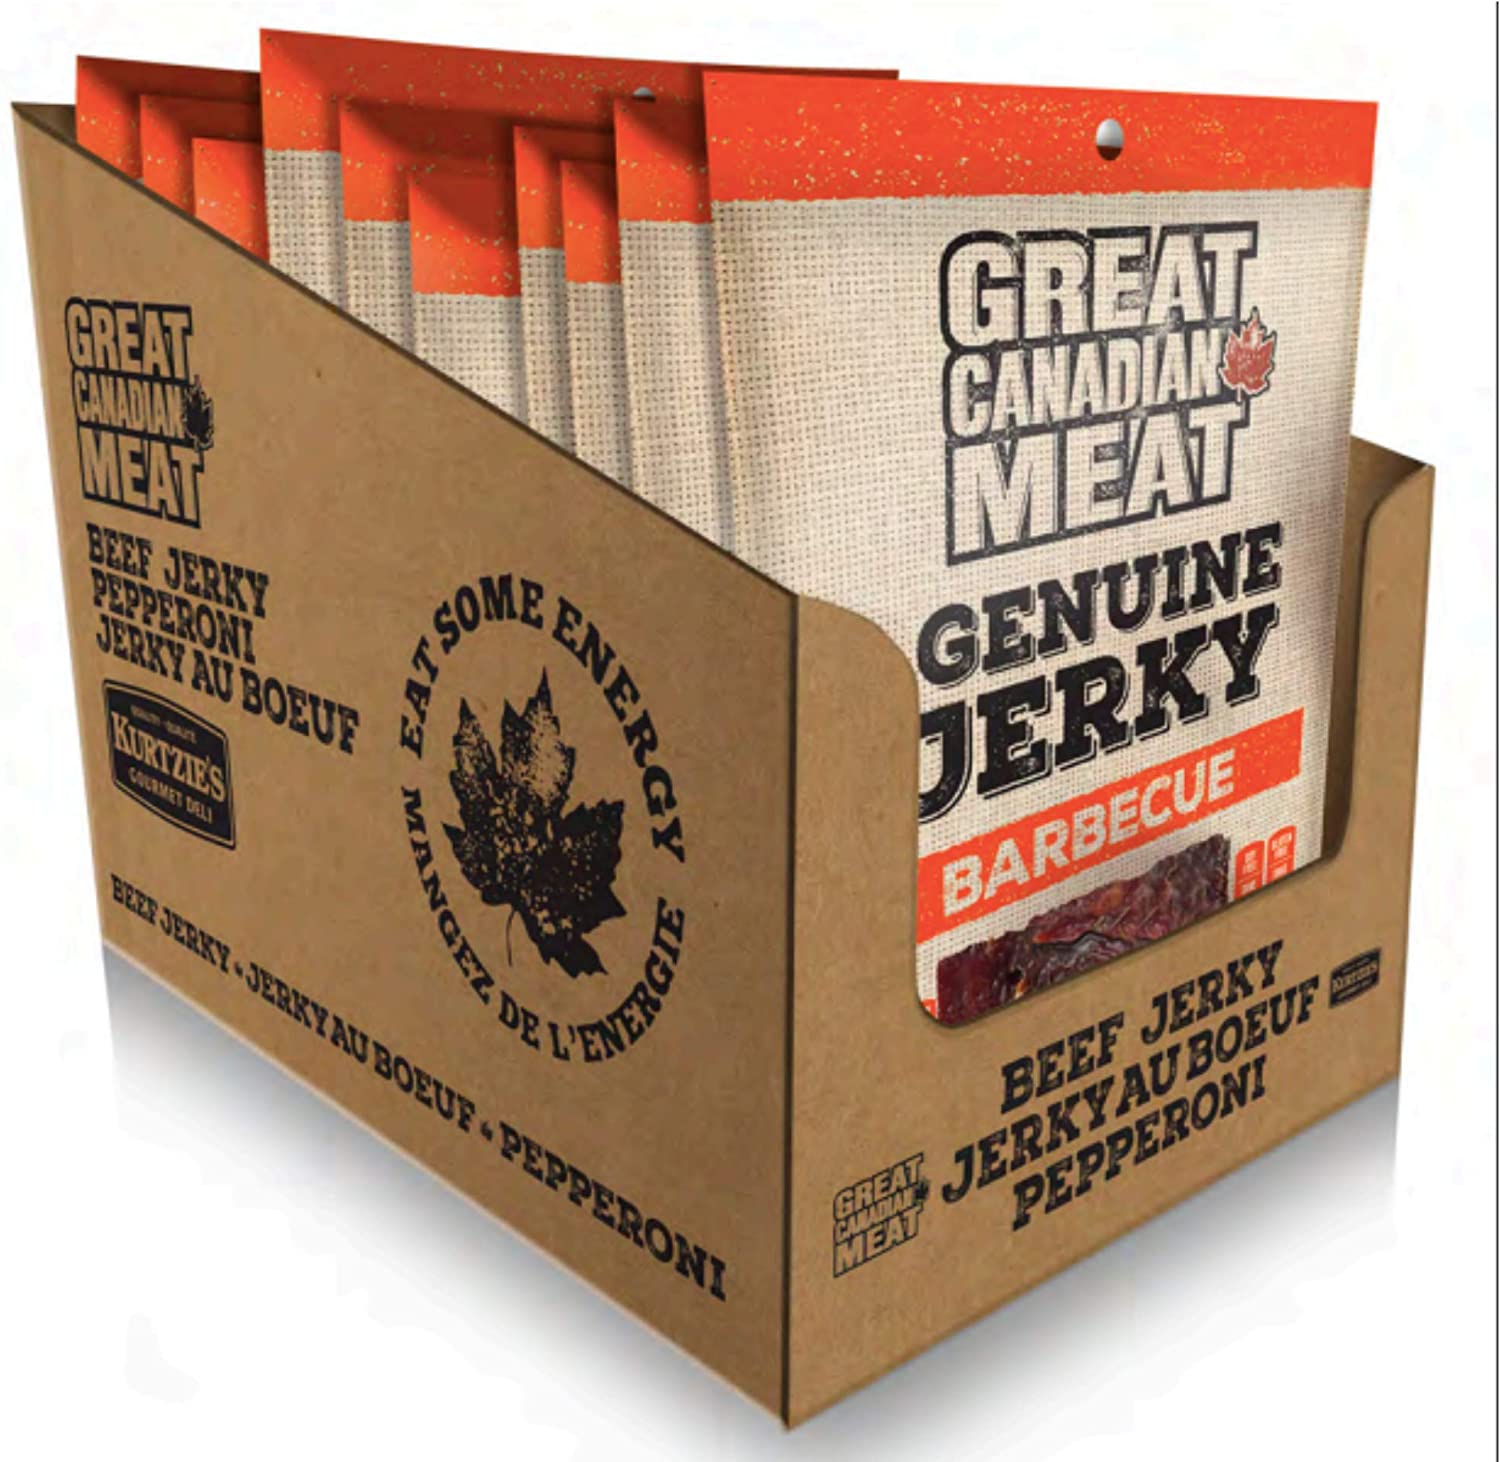 Barbecue Beef Jerky (Great Canadian Meat)_2_cc